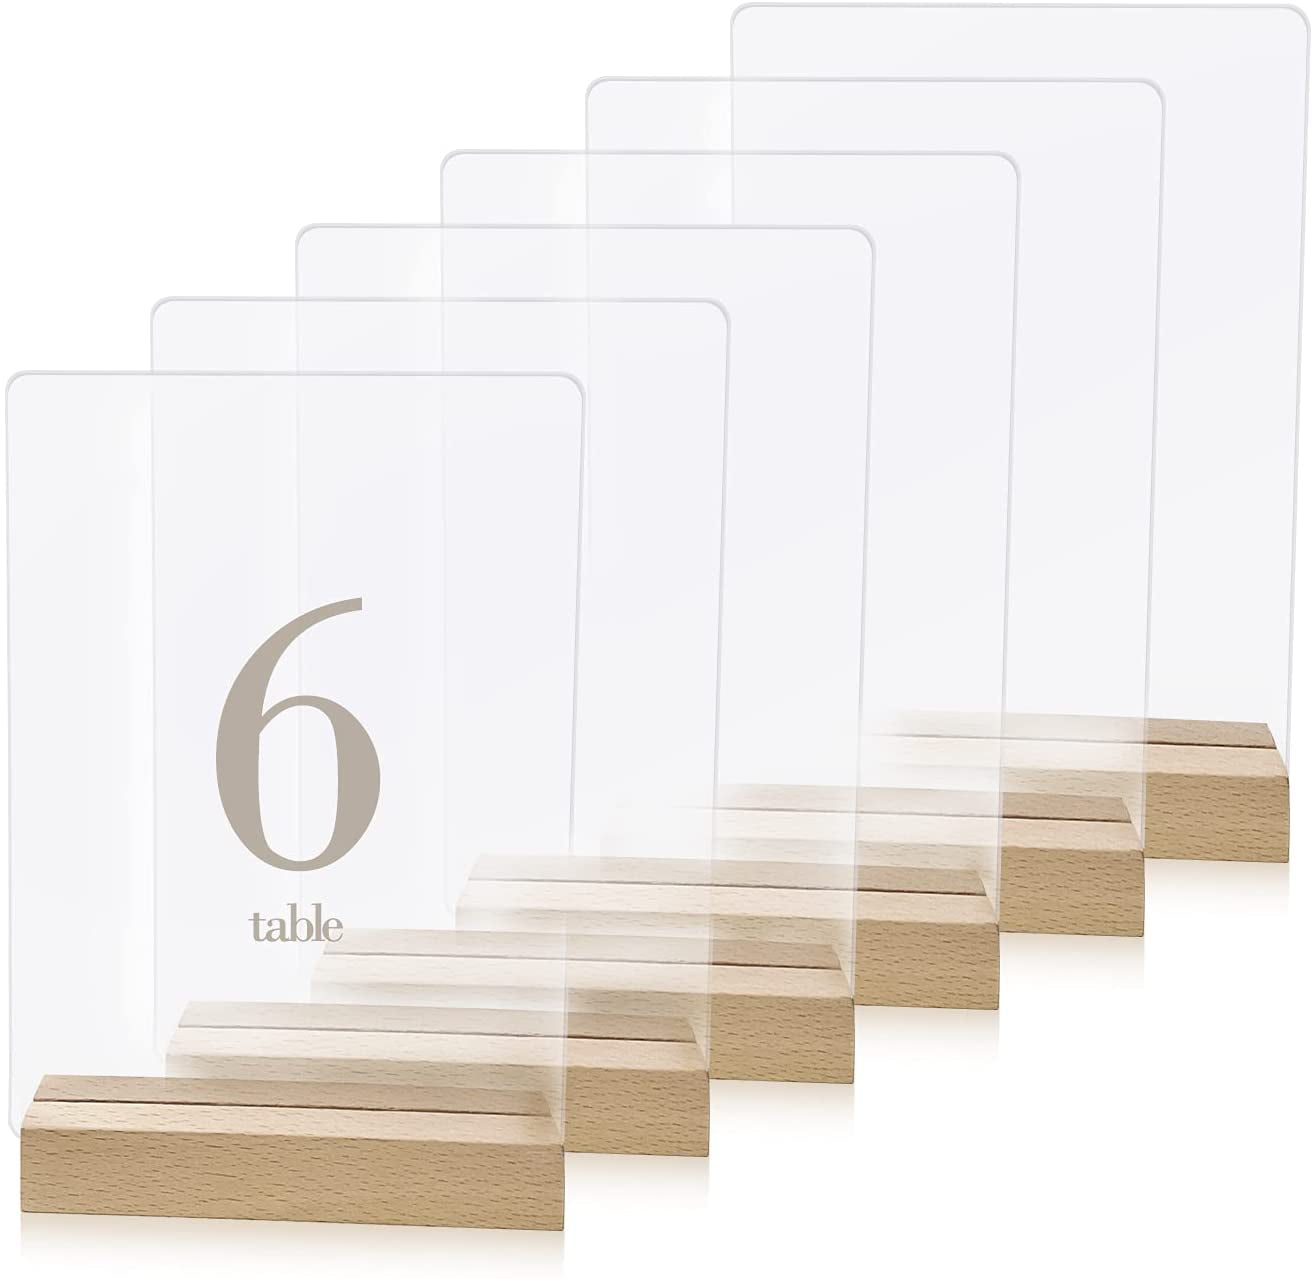 Table Numbers Celebration Numbers Birthday Decor Wooden Numbers Signs 